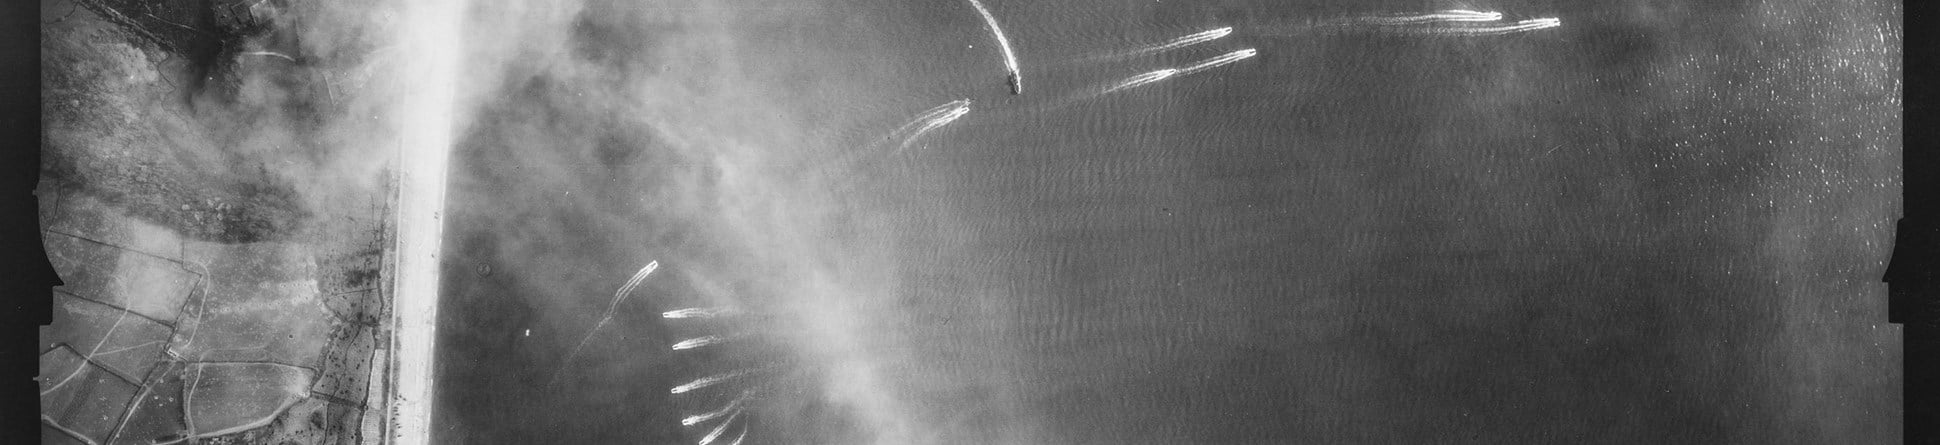 Detail from a black and white vertical aerial photograph, showing ships and their wake on water adjacent to a strip of land. The land is to the left edge of the image and includes a narrow strip of beach next to a patchwork landscape of fields and roads.